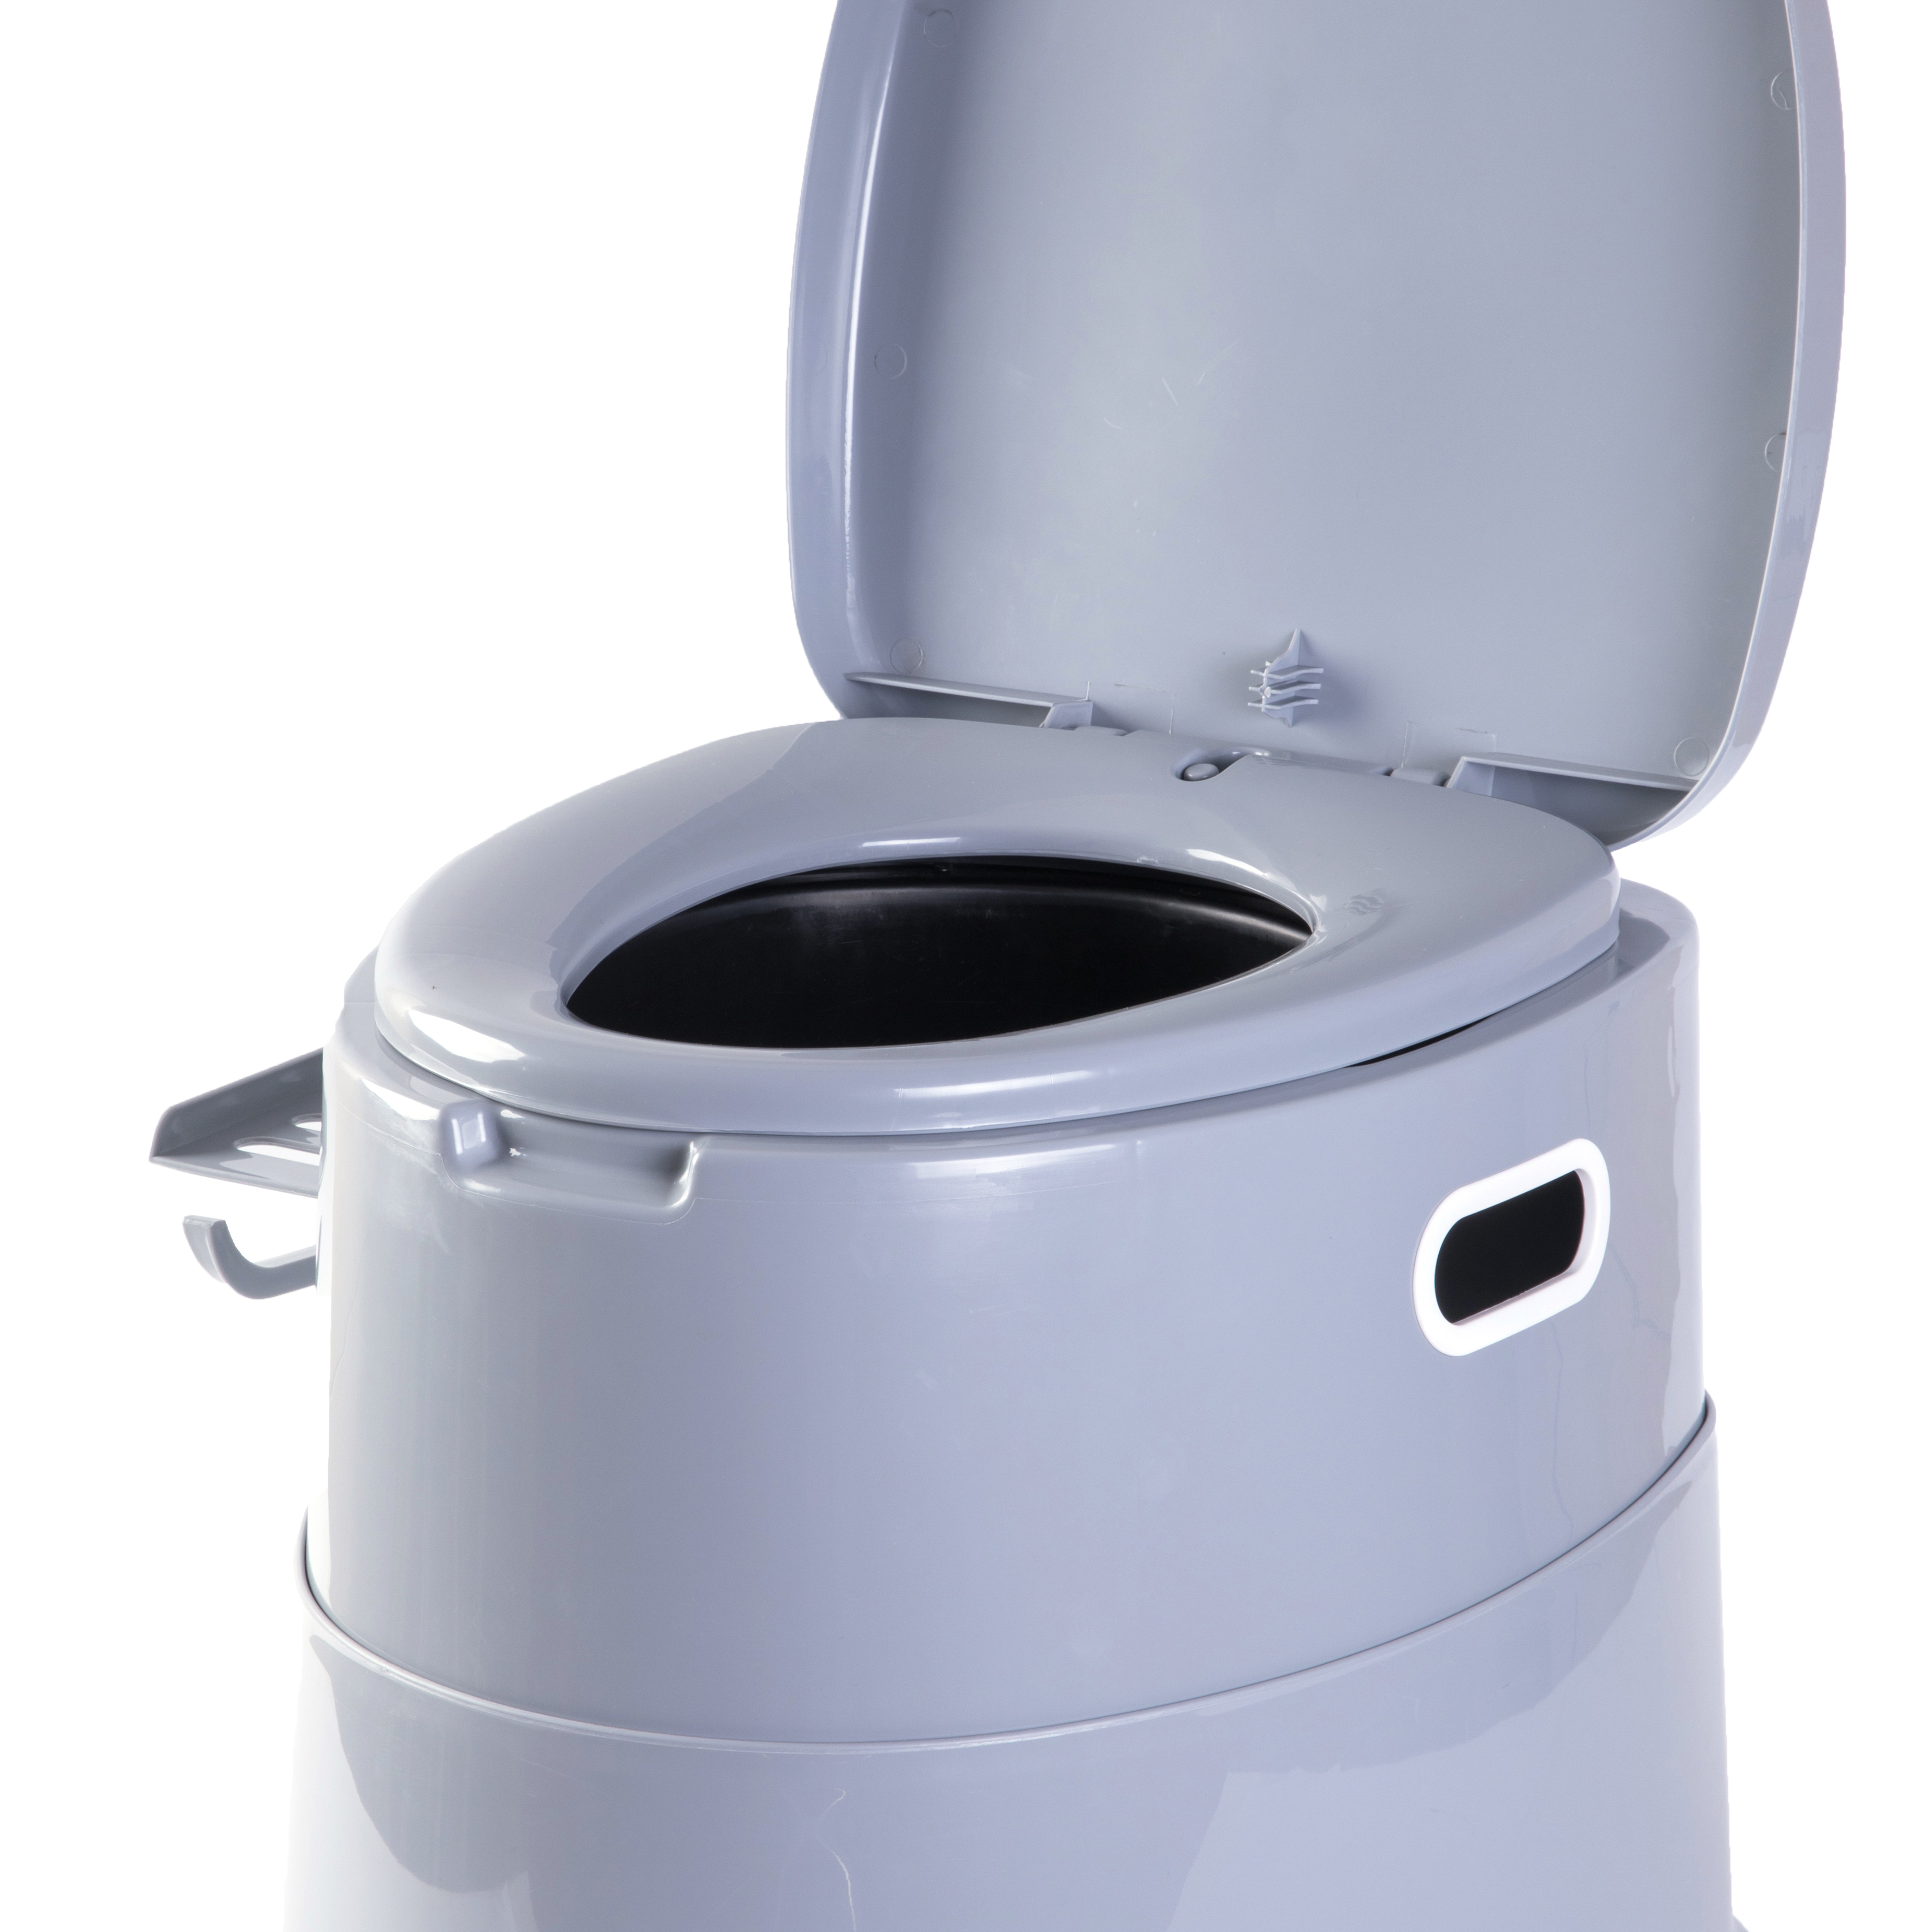 Folding Portable Travel Toilet For Camping And Hiking